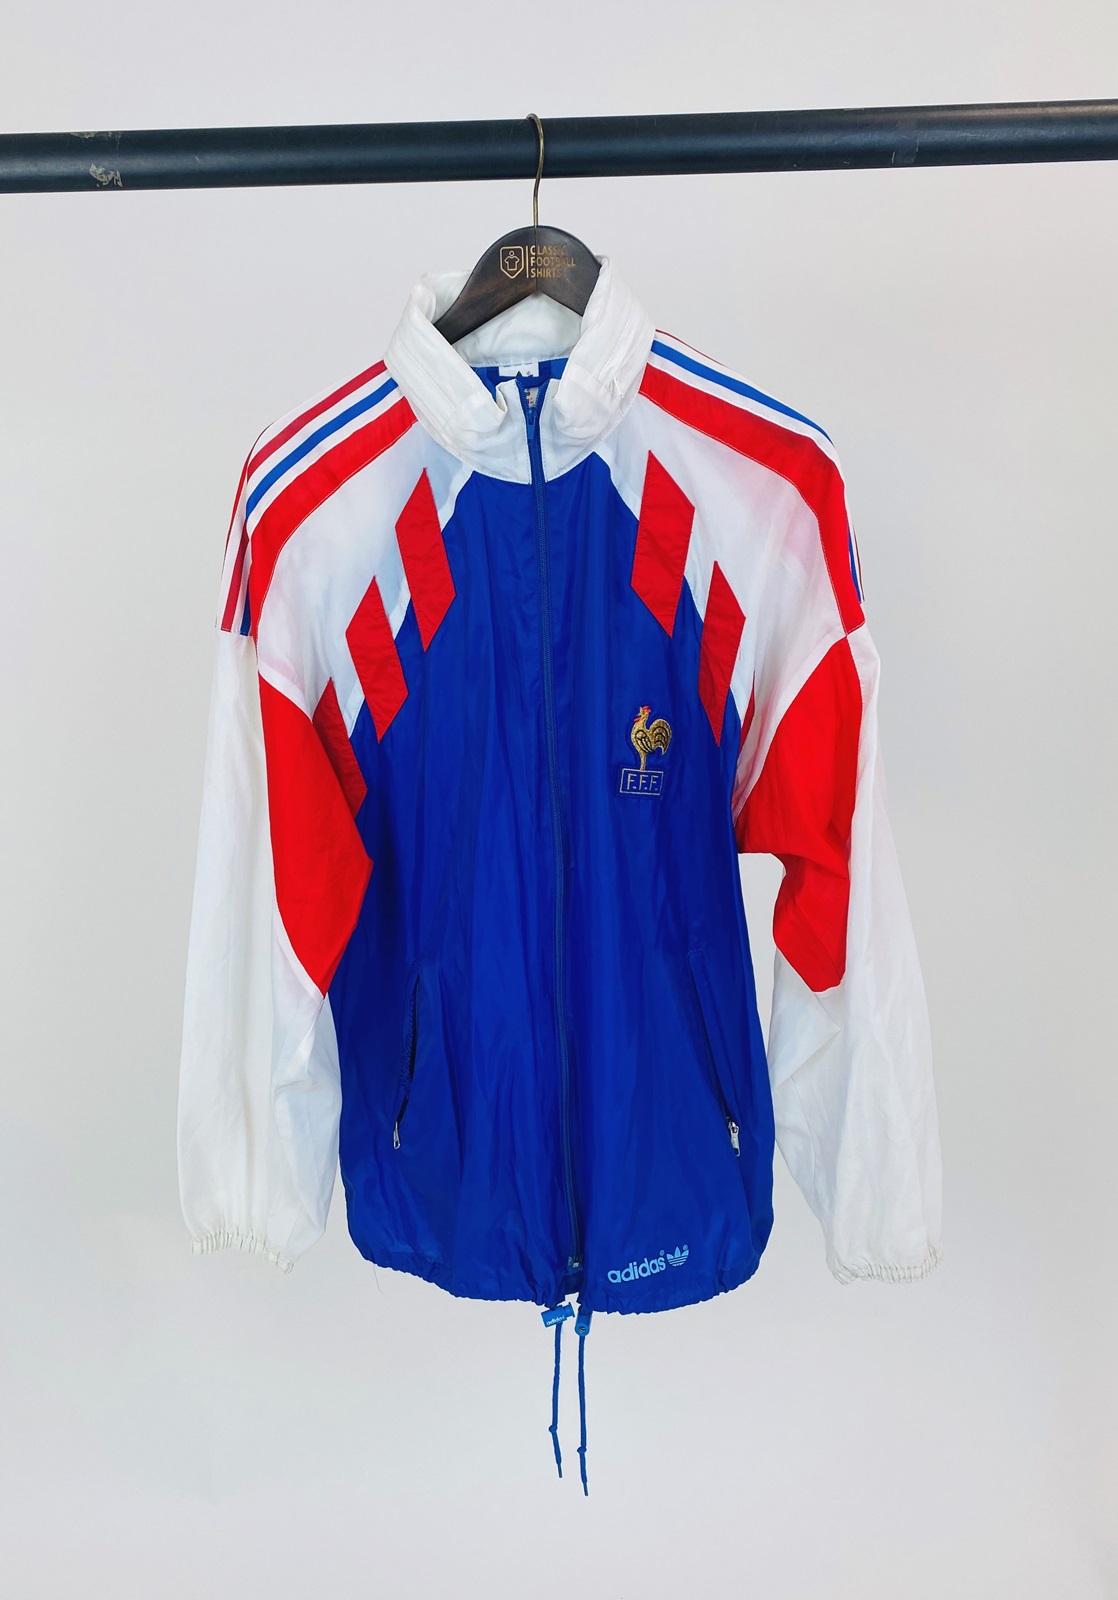 8 Of The Best-Ever Classic National Team 'Jackets' - Footy Headlines